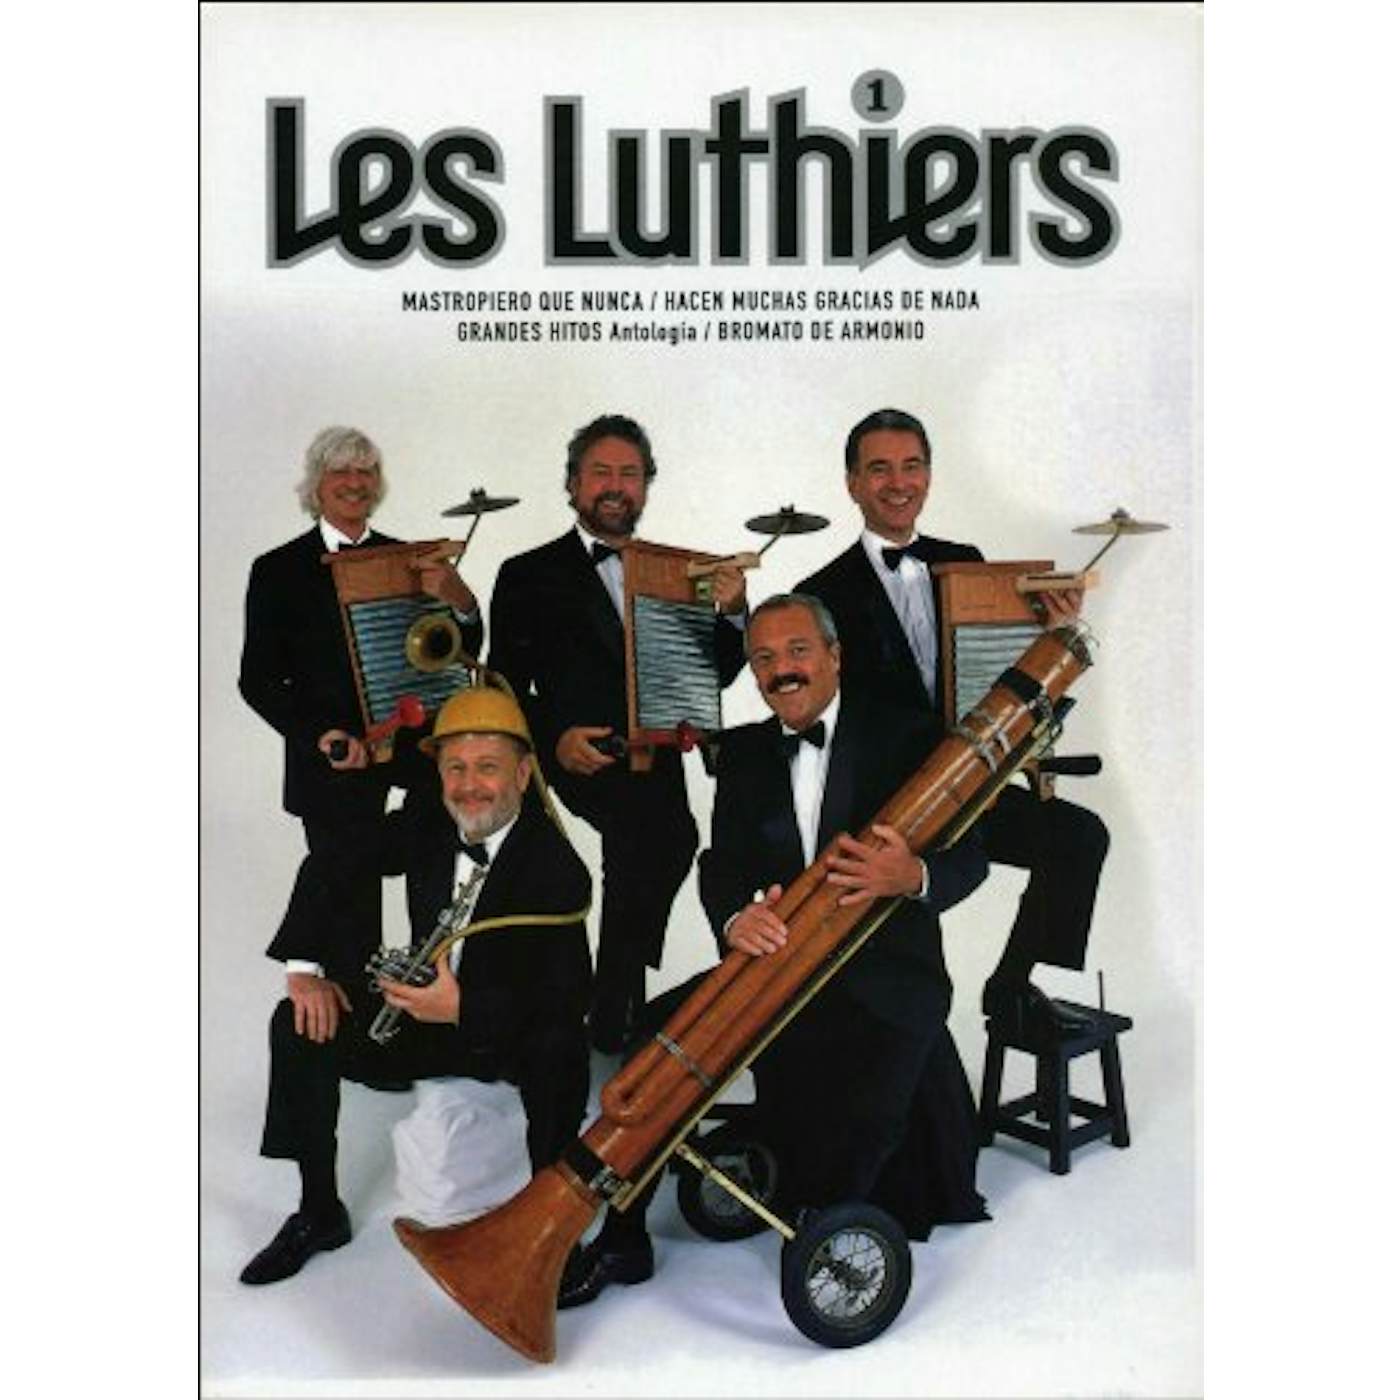 Les Luthiers PACK ANIVERSARIO 1 DVD